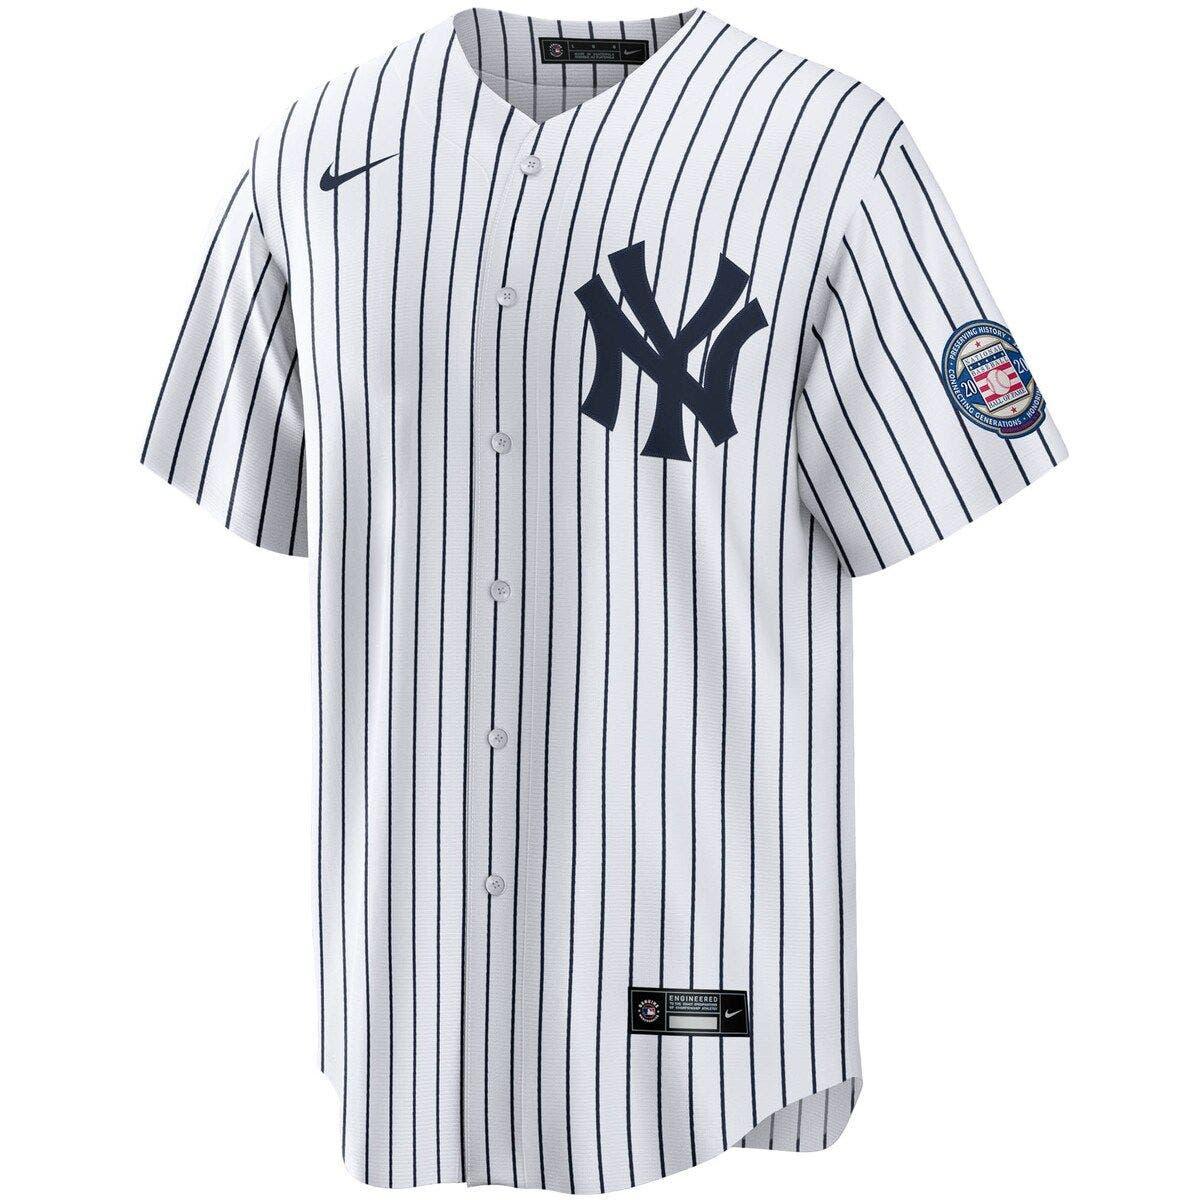 jeter home jersey